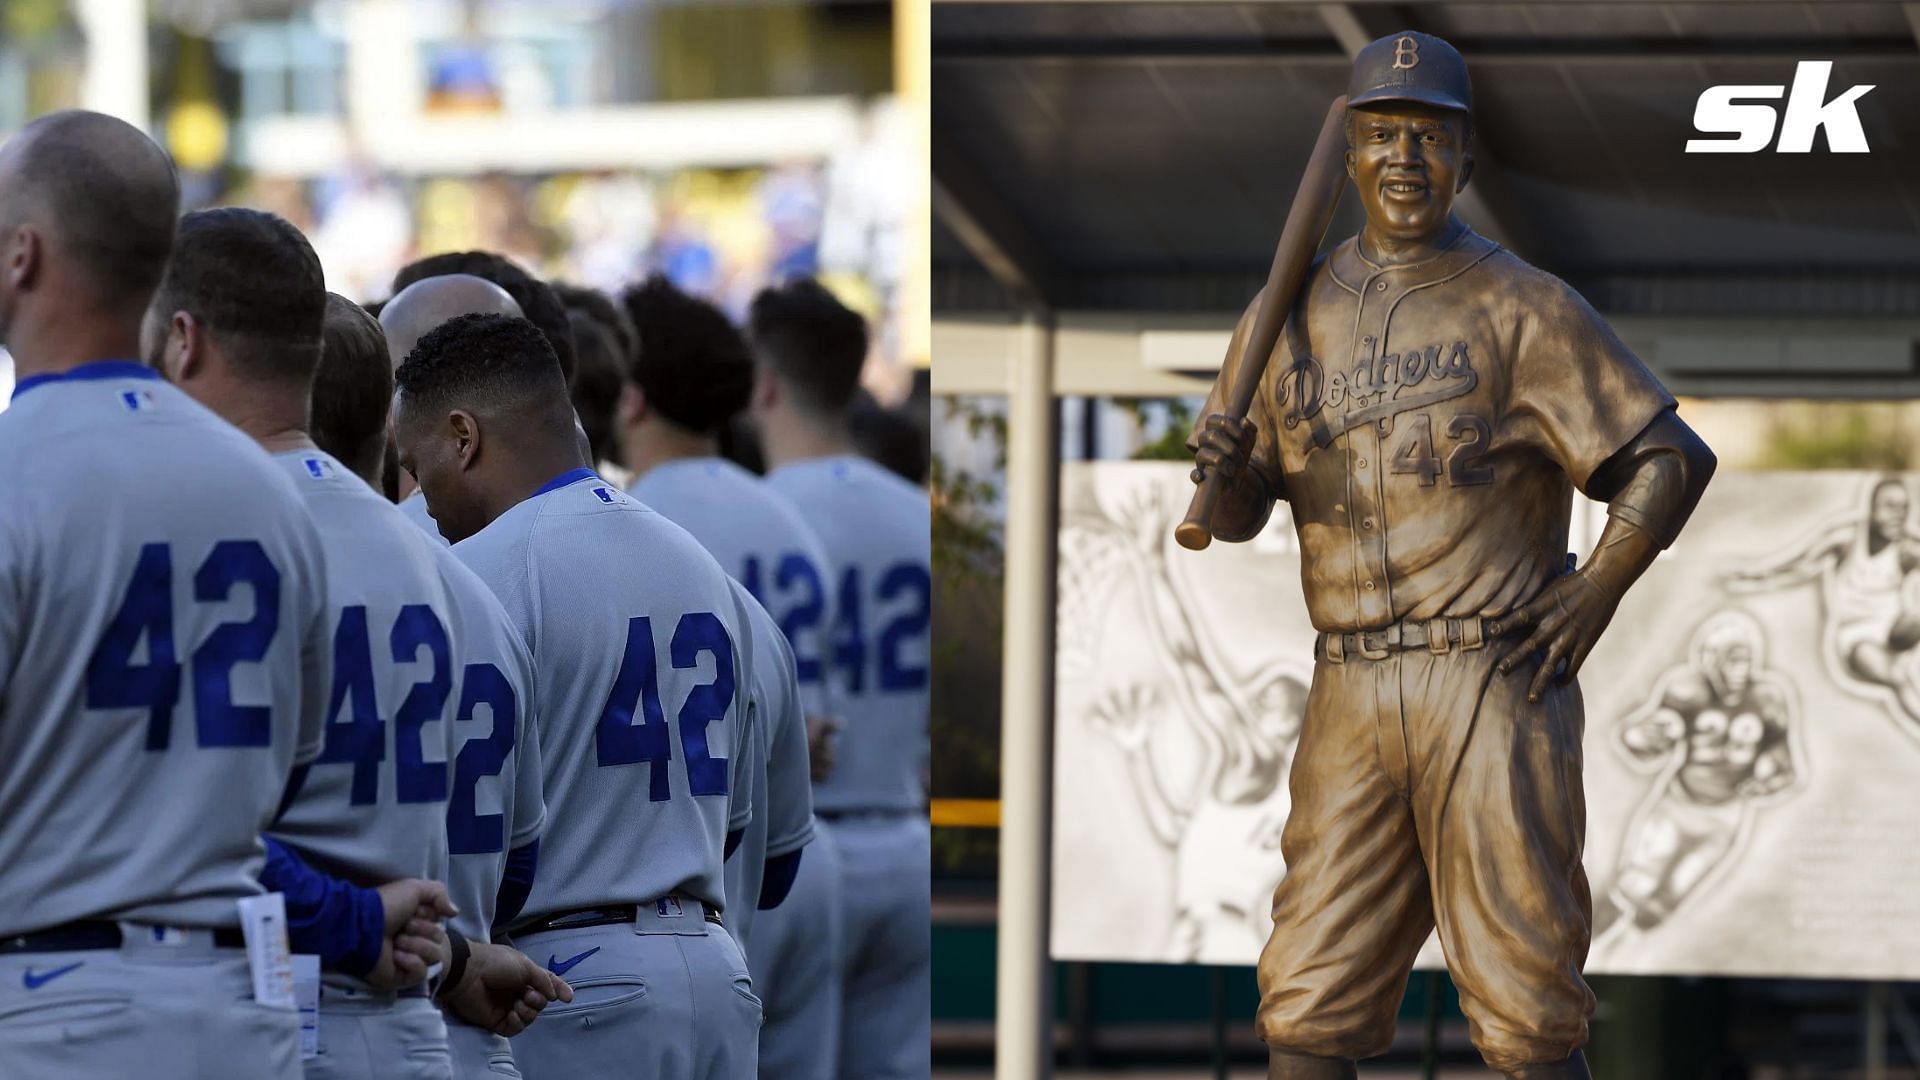 The charred remains of a stolen Jackie Robinson statue has been found in Wichita, Kansas